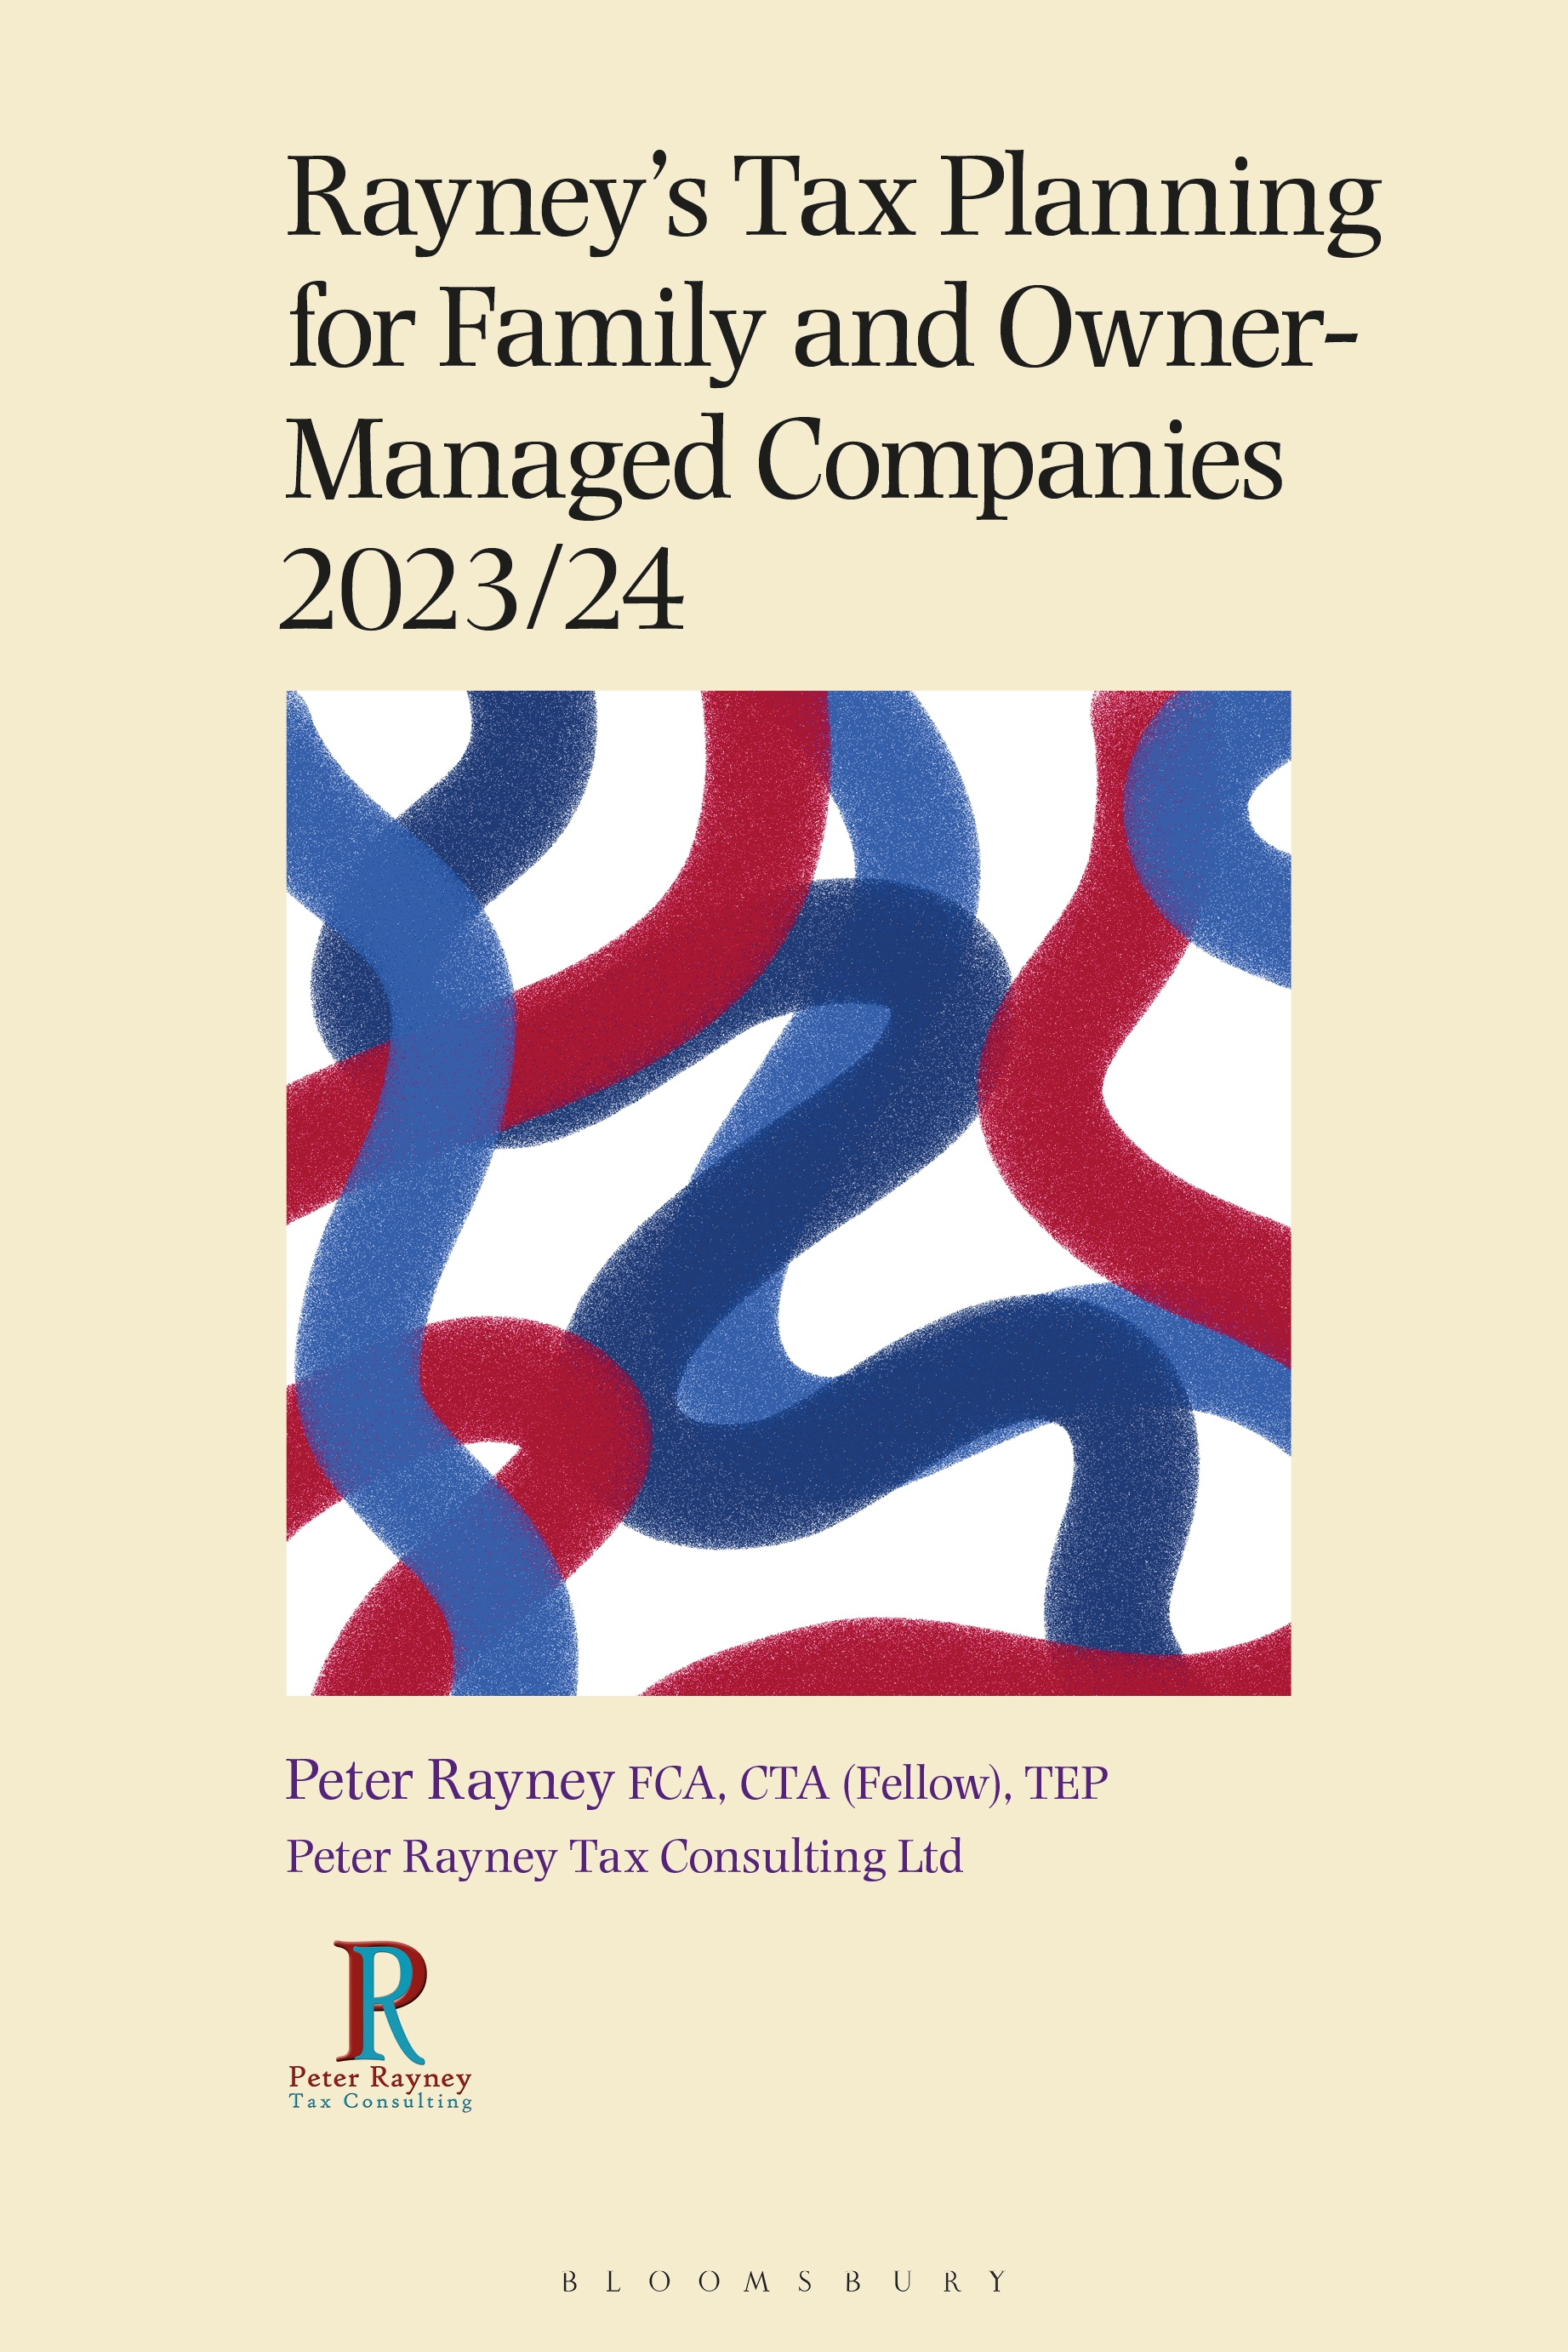 Rayney's Tax Planning for Family and Owner-Managed Businesses 2023/24 book jacket